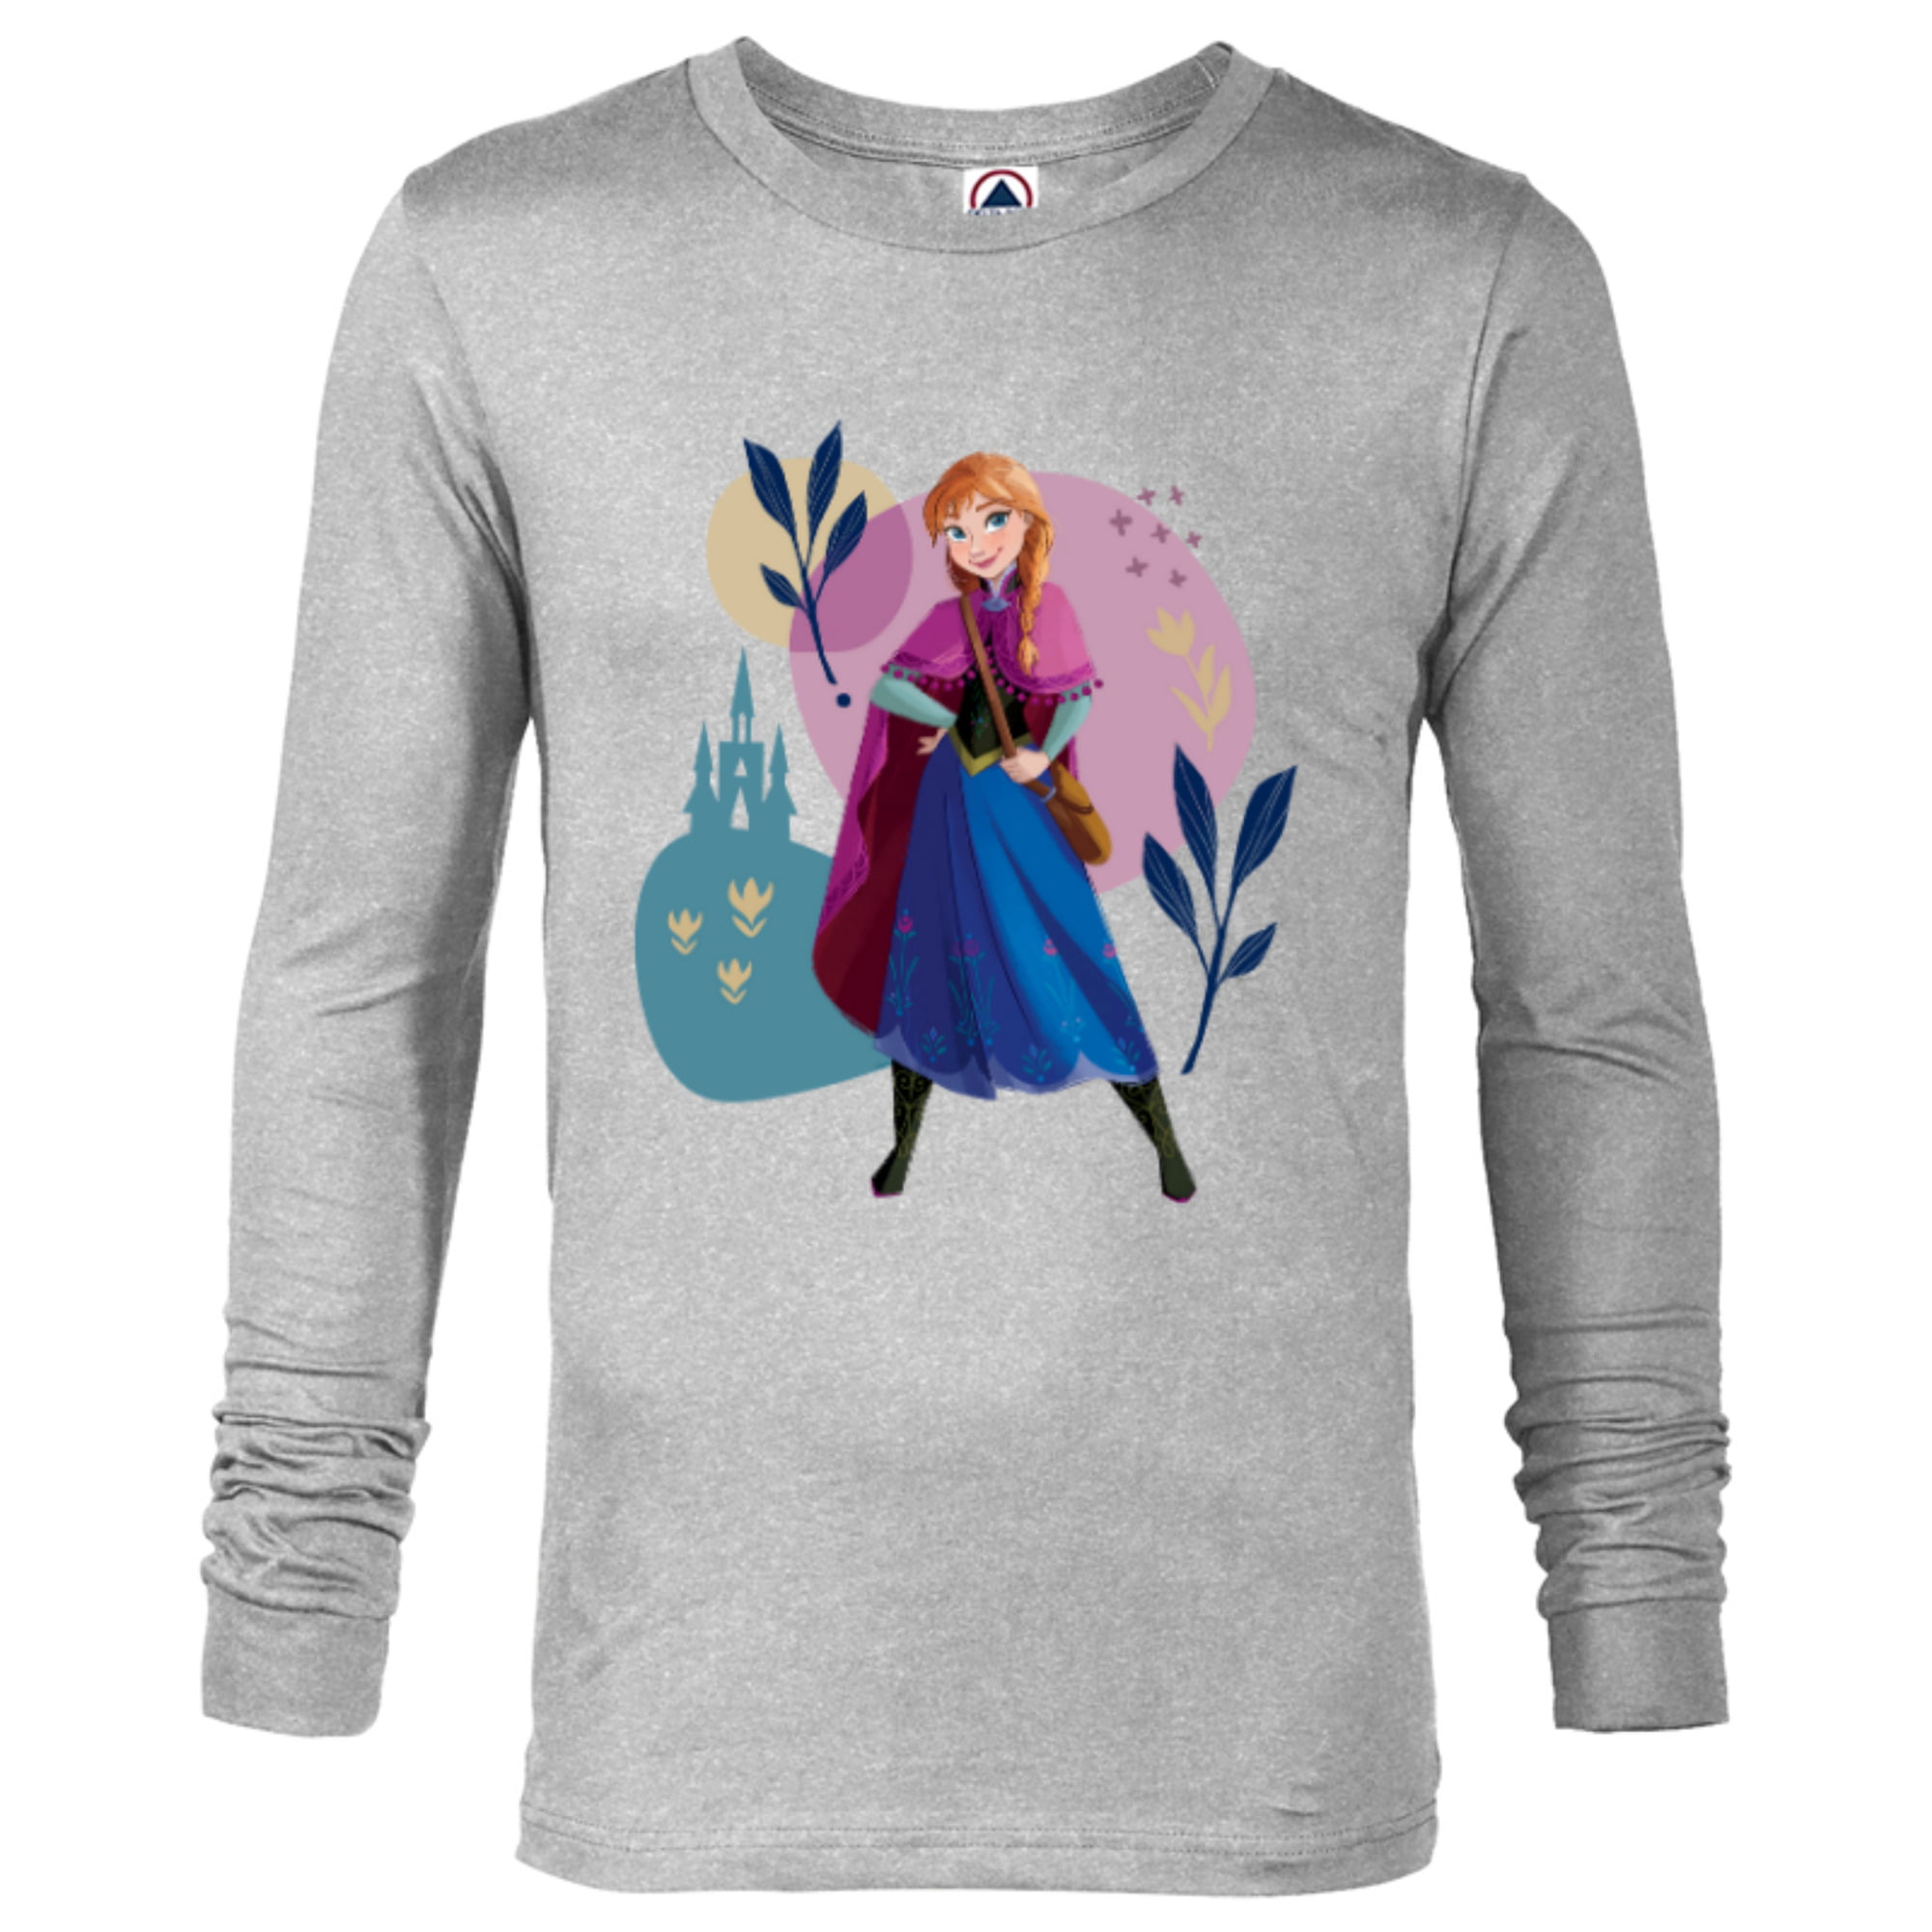 Customized-Athletic of - Anna Princess for Frozen Disney T-Shirt Sleeve - Heather Arendelle Men Long